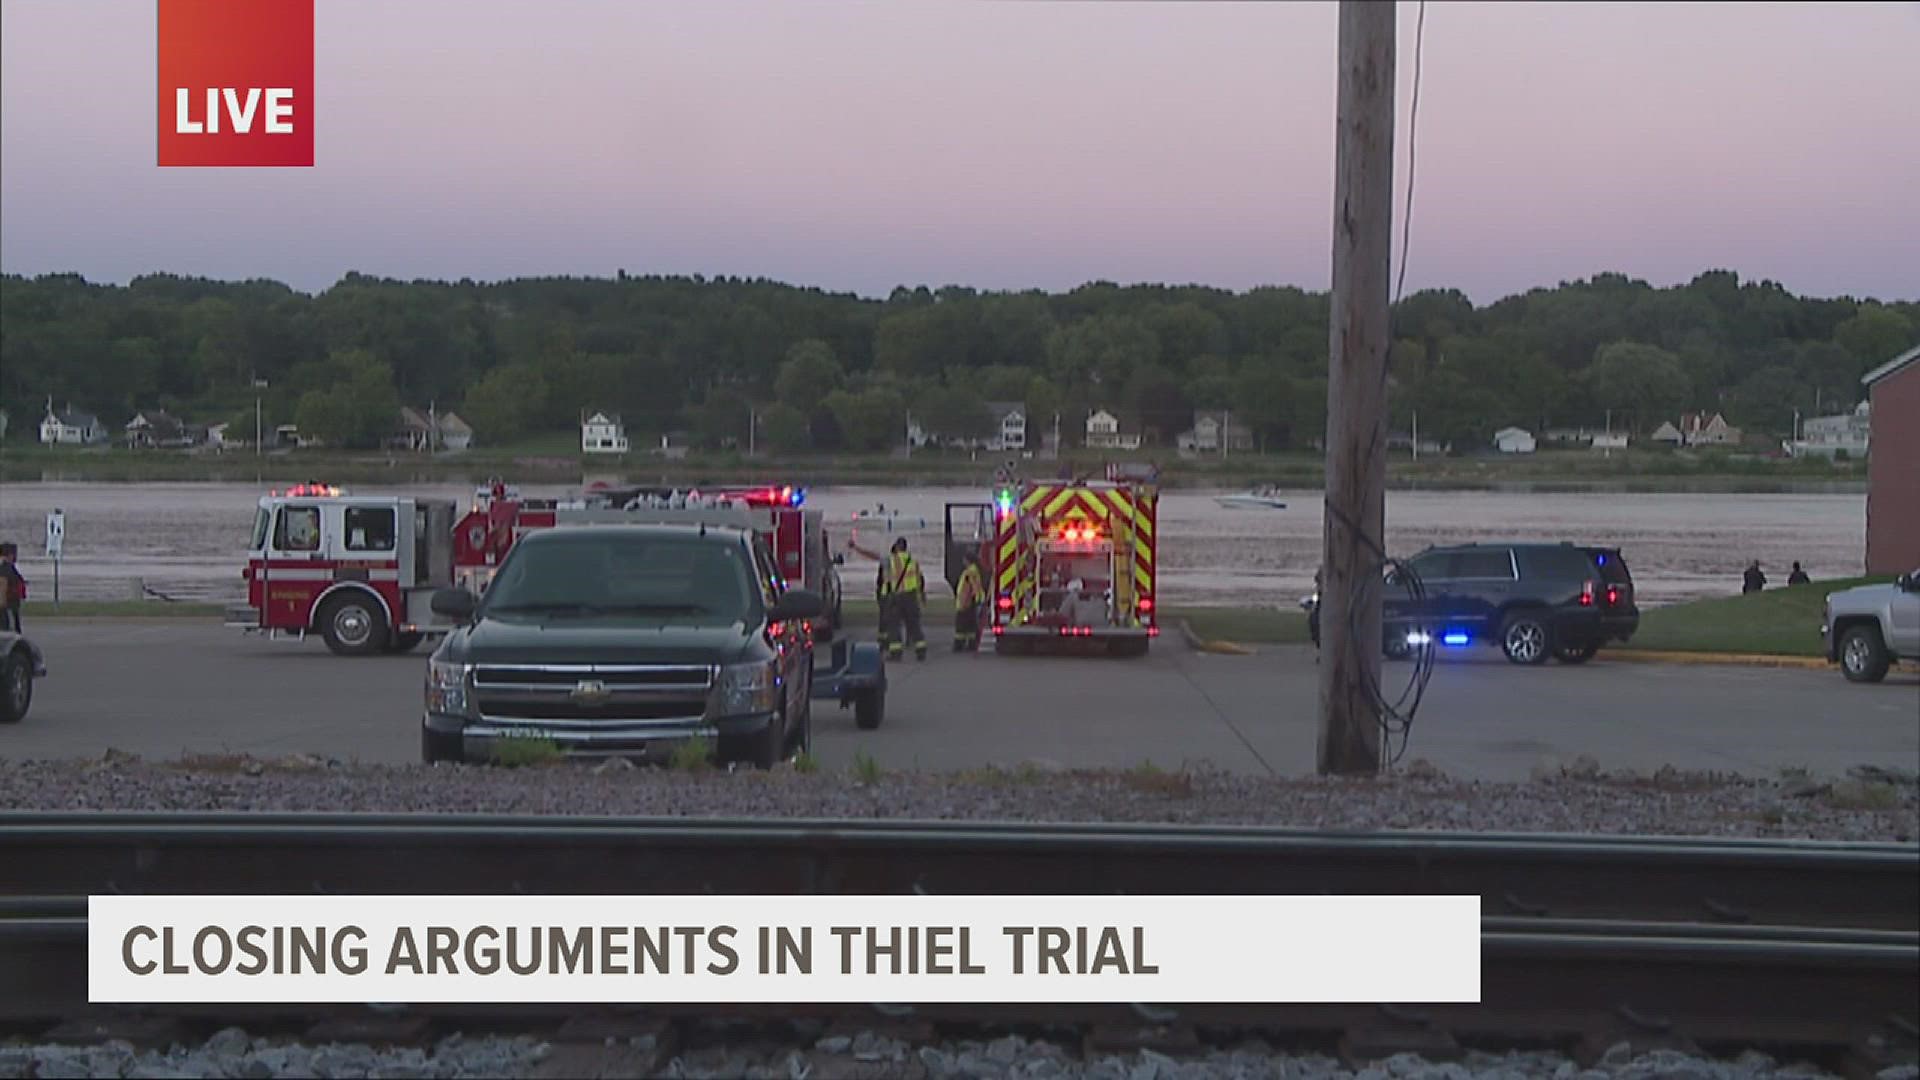 Jurors heard closing arguments today against a Pleasant Valley man accused of killing two people in a LeClaire boating crash in August 2020.